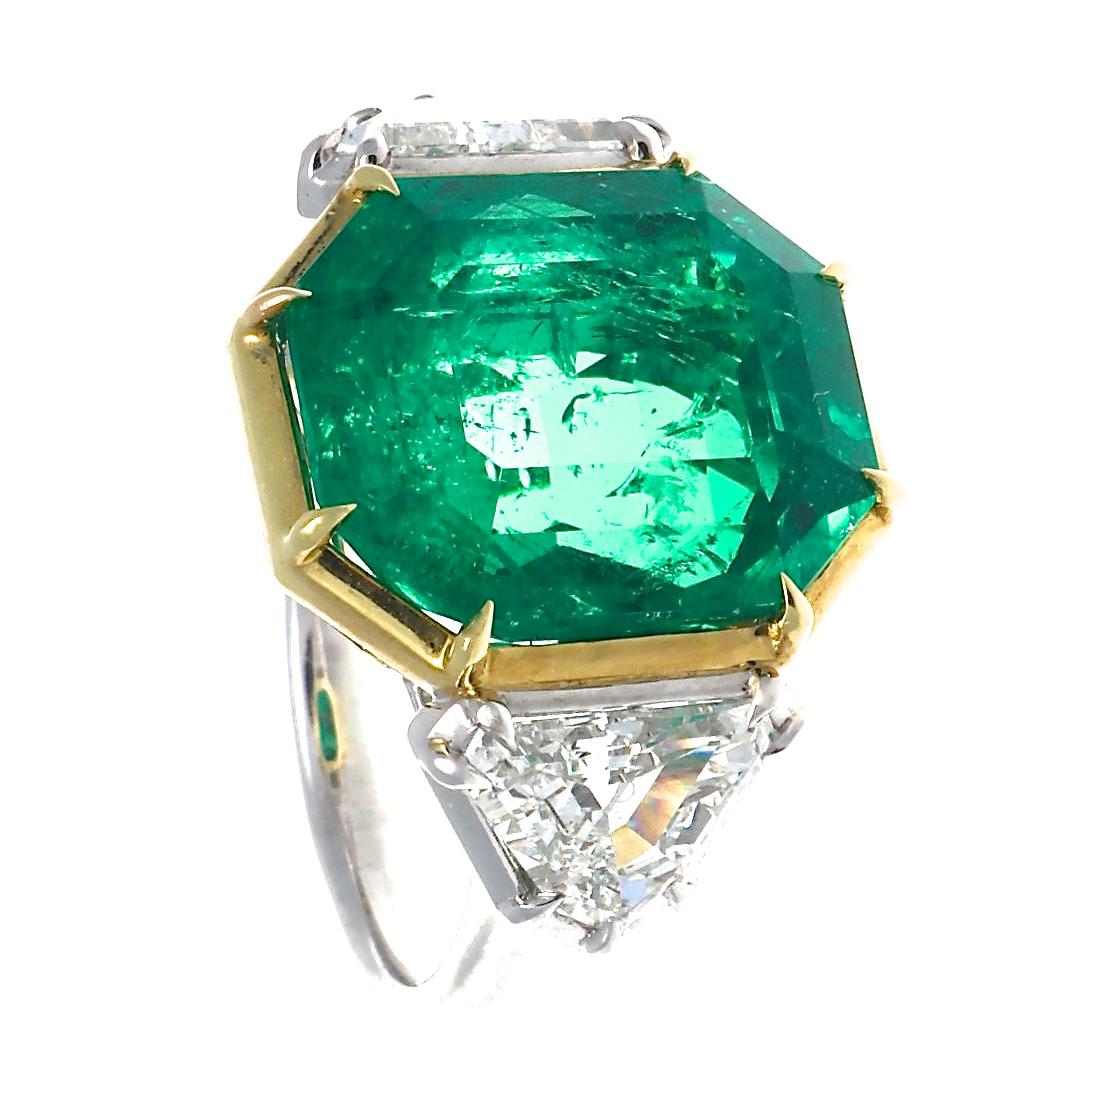 An emerald of exceptional color and brilliance. For thousands of years, emeralds have been considered one of the world's most valuable jewels with this ring being no exception to that ideology. Featuring an AGL certified 10.03 carat Colombian